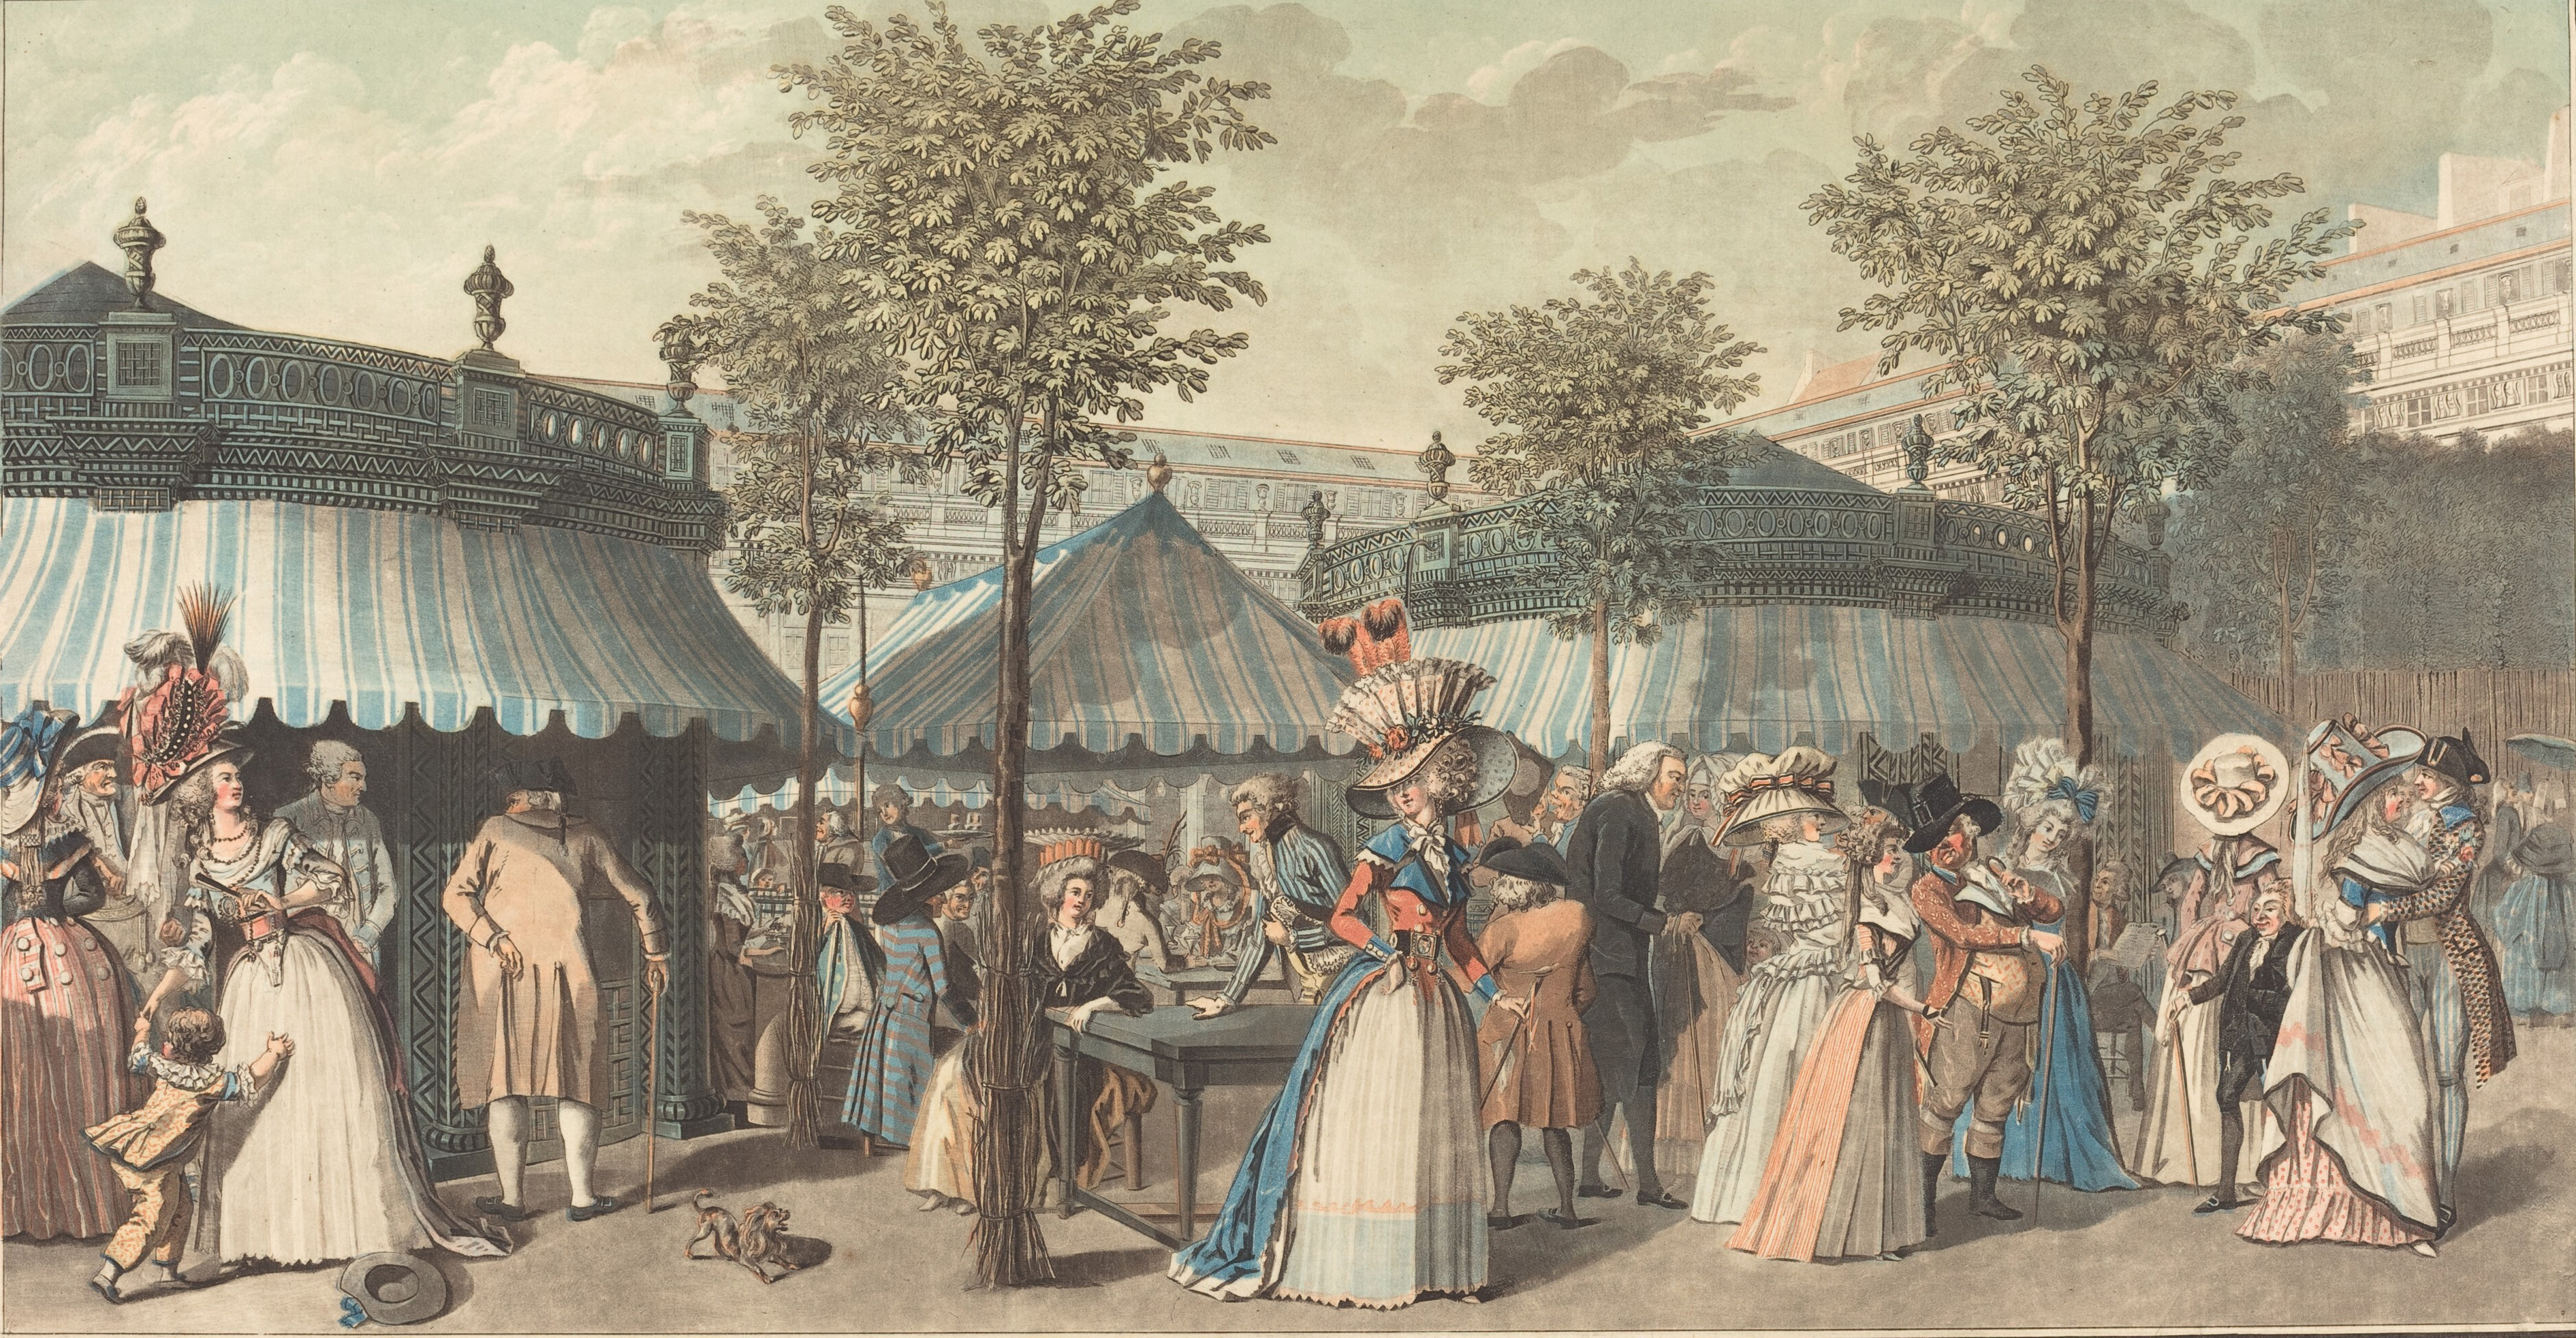 The gardens of the Palais-Royal were a great center of rumors and agitation in 18th-century Paris.